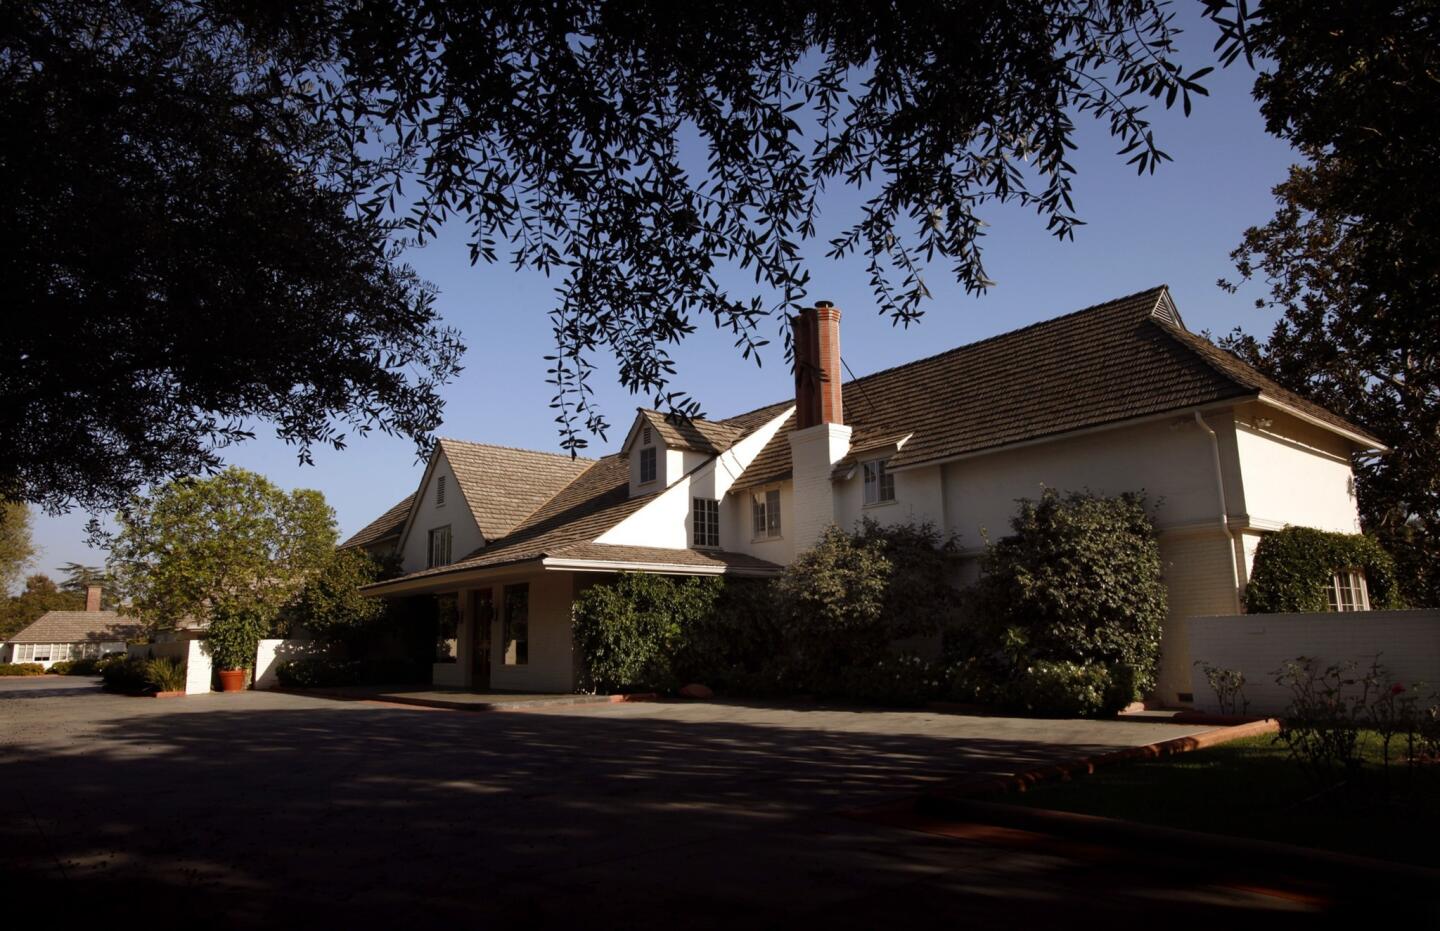 The front view of the Bob Hope estate in Toluca Lake. The house is nearly 15,000 square feet.